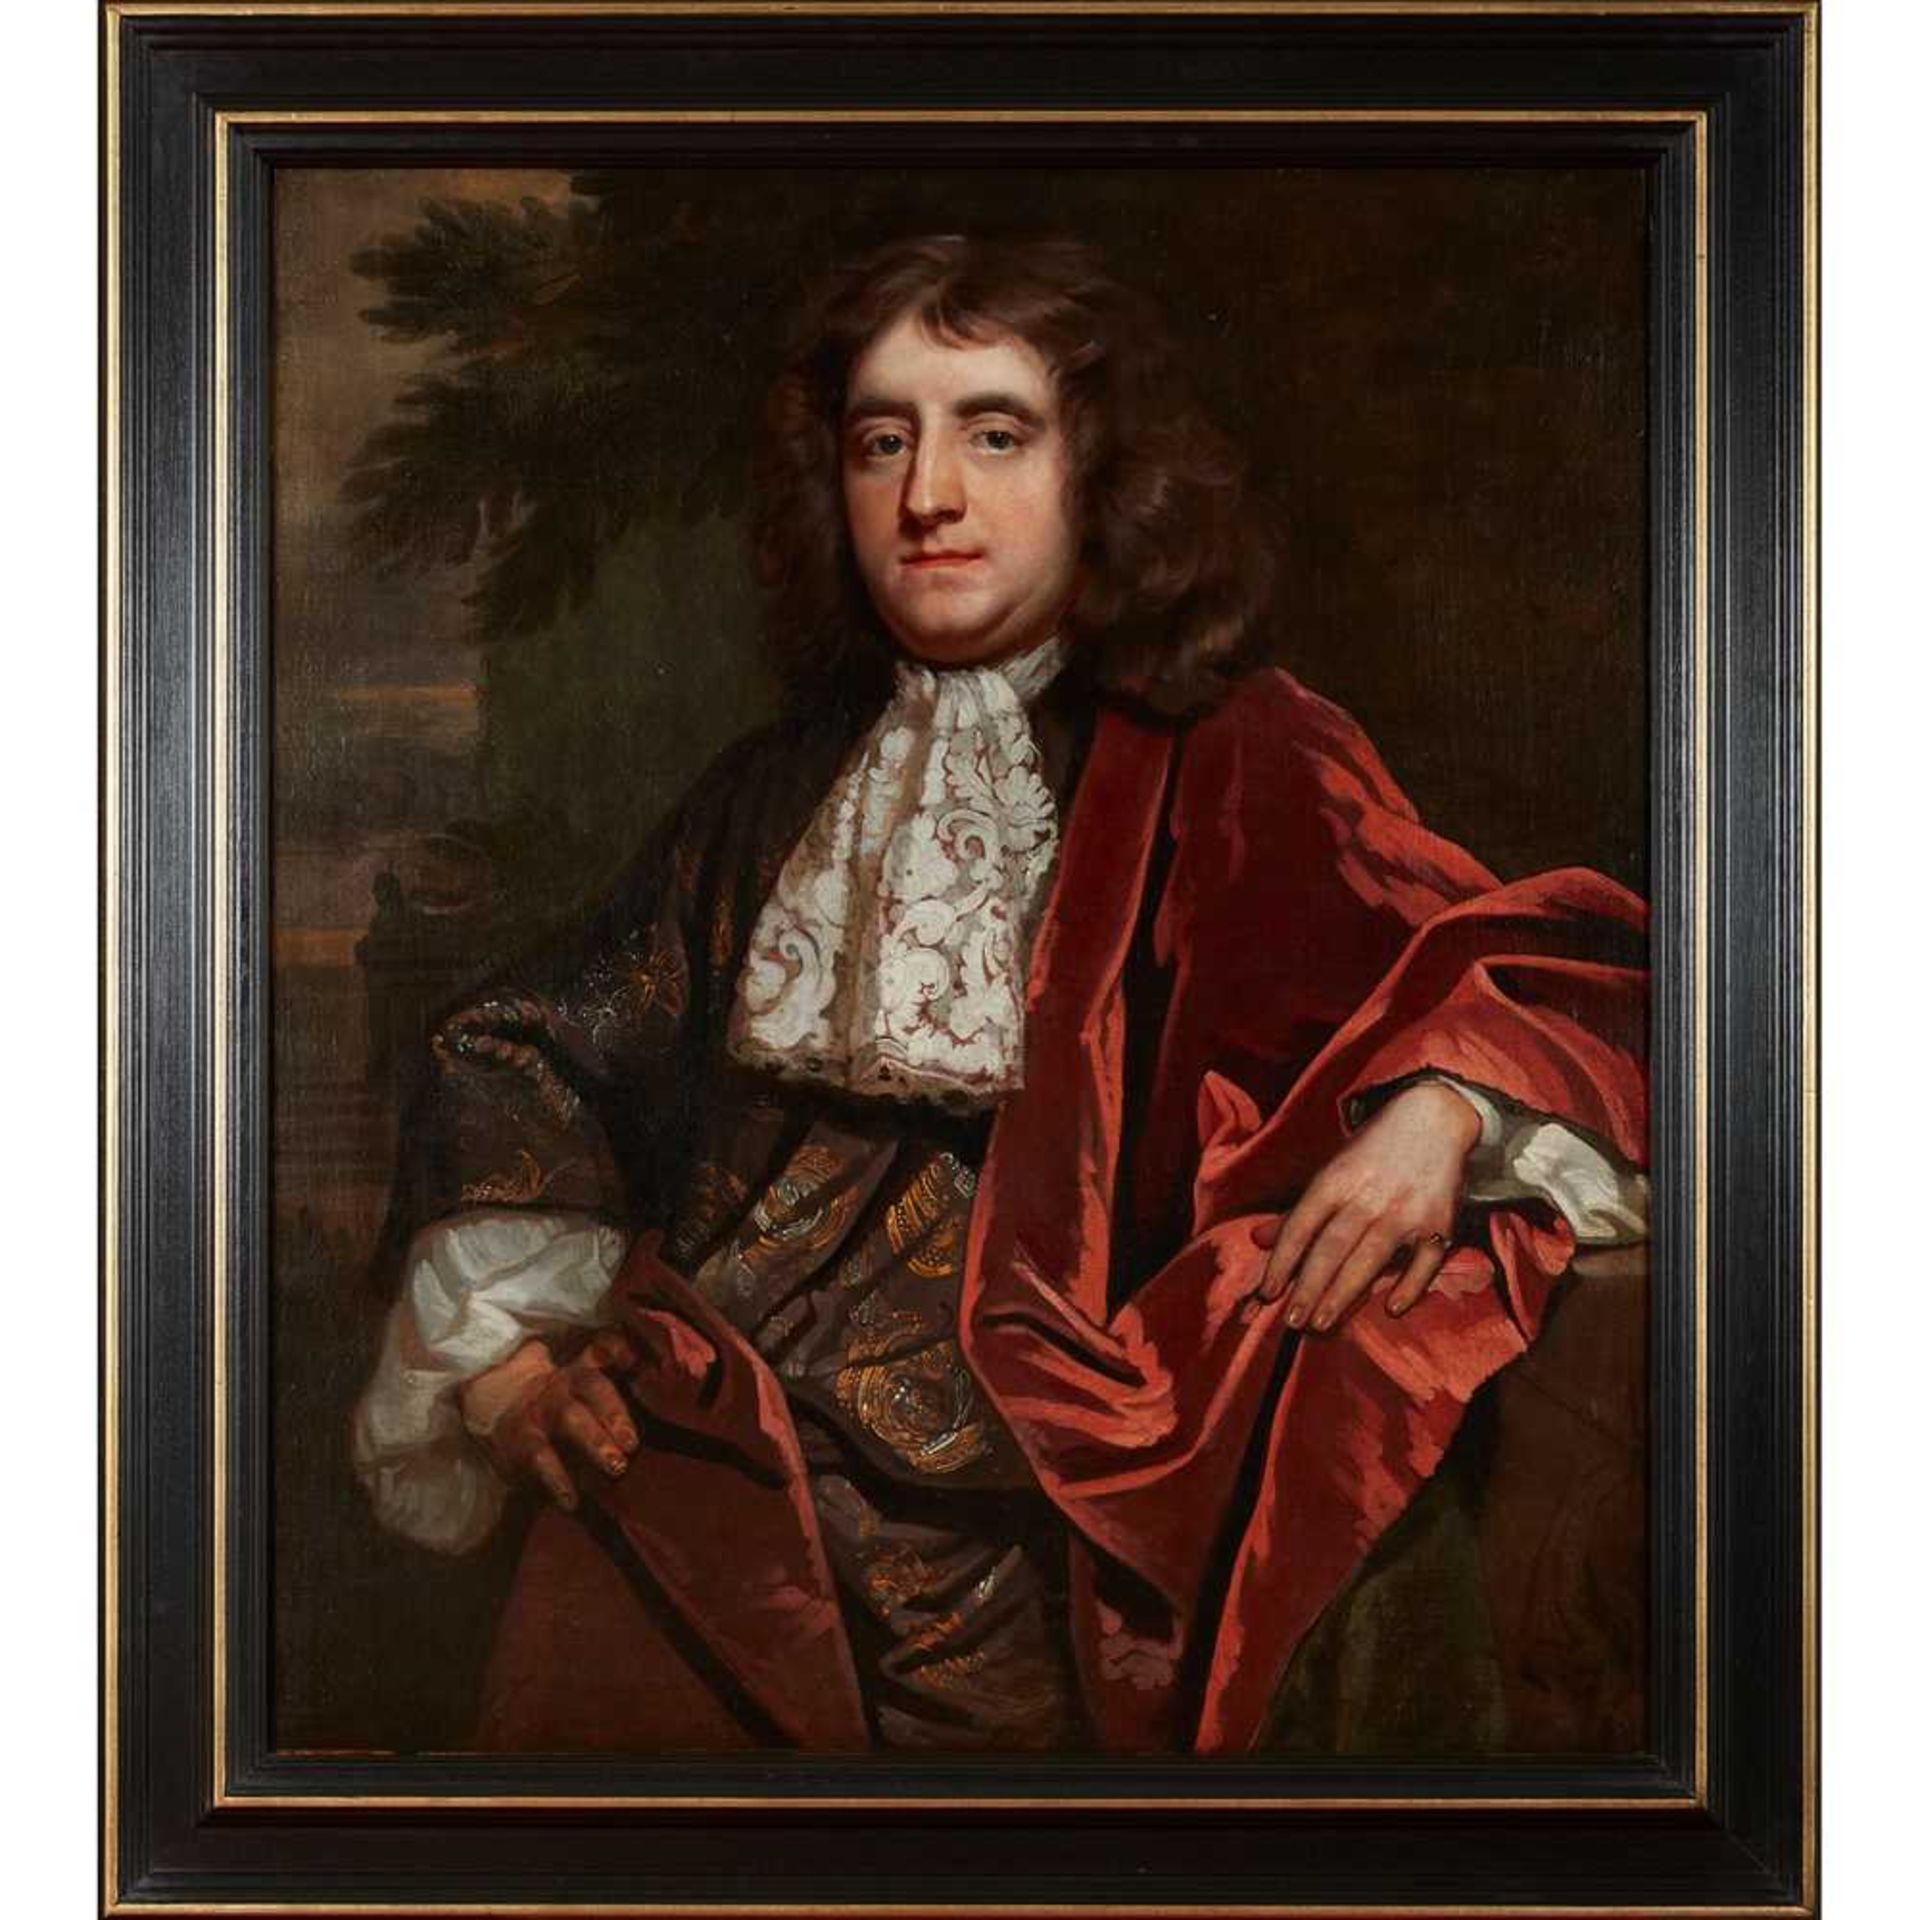 CIRCLE OF SIR PETER LELY HALF LENGTH PORTRAIT OF A GENTLEMAN IN LACE CRAVAT - Image 2 of 12